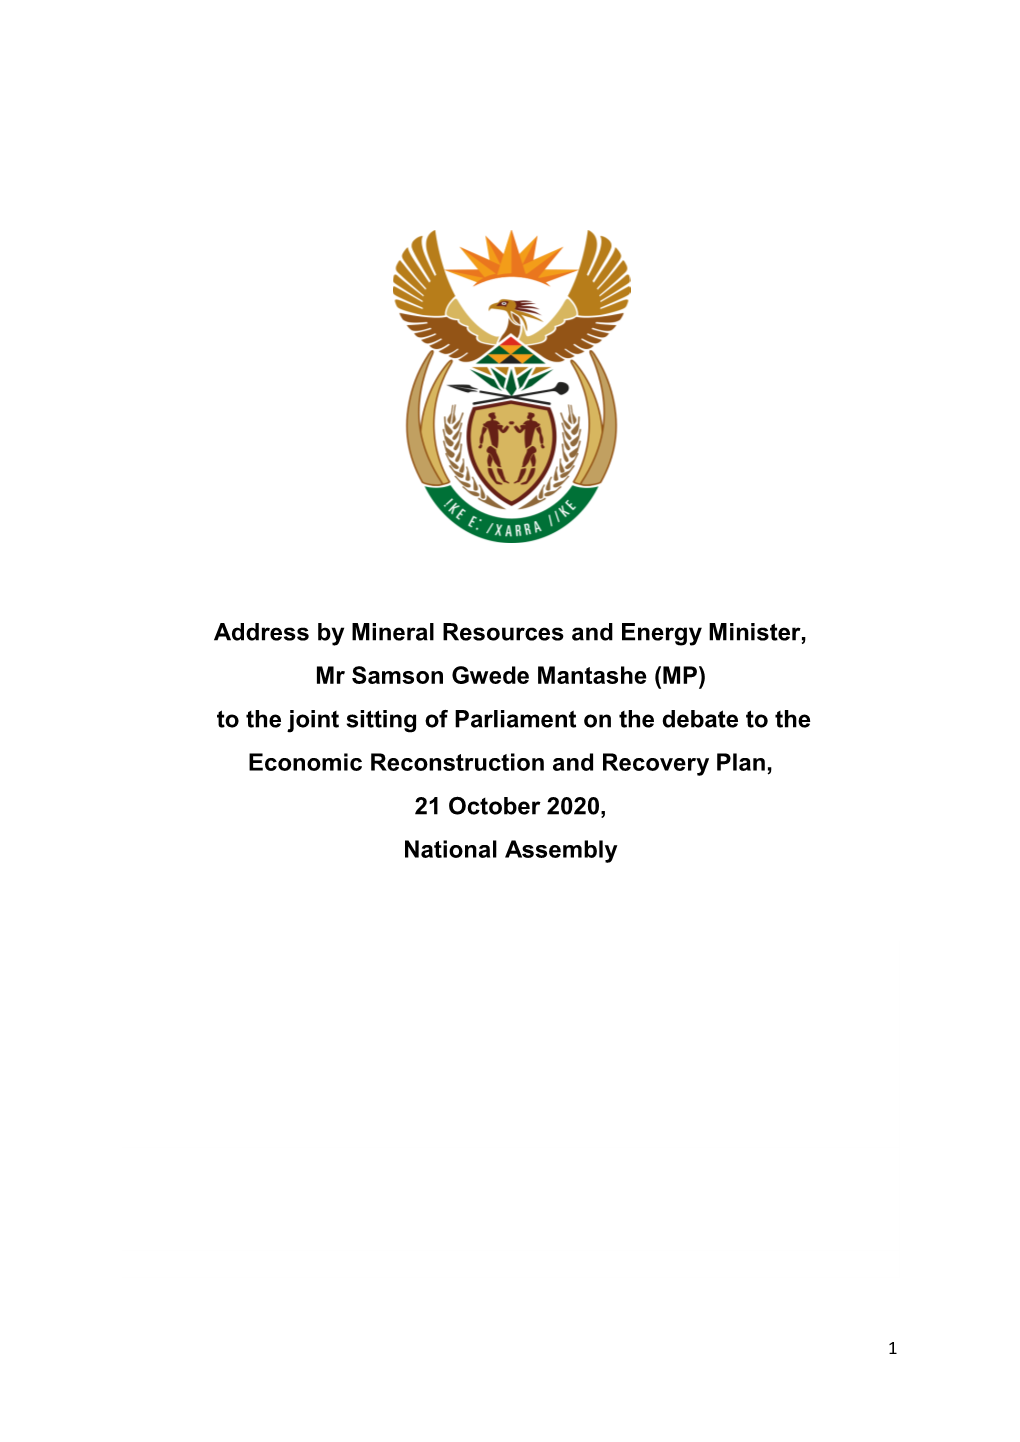 Address by Mineral Resources and Energy Minister, Mr Samson Gwede